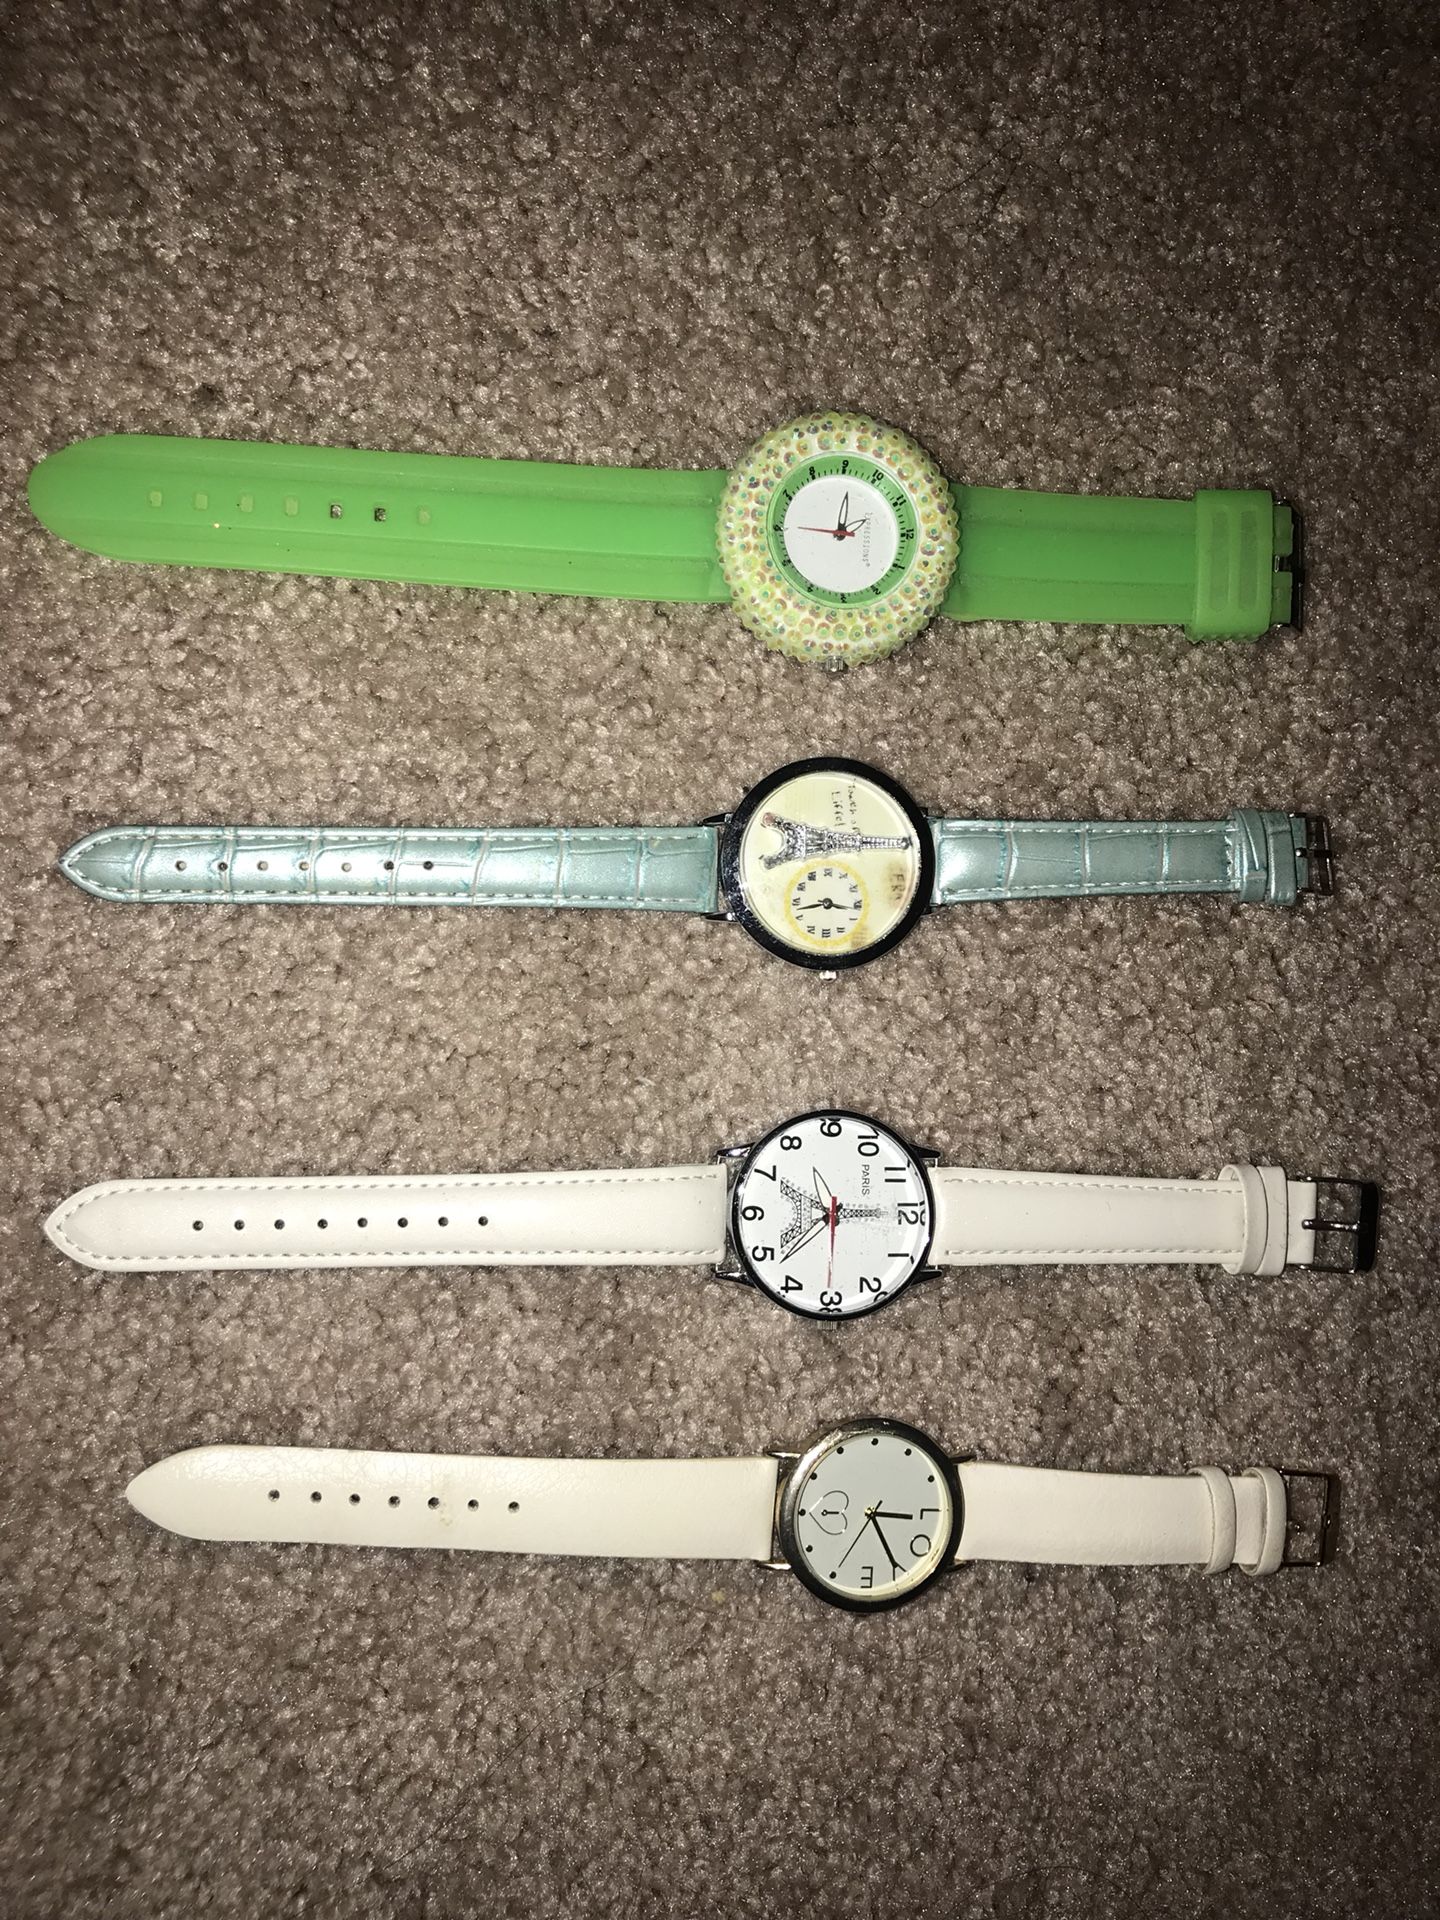 Watches. $5 each. $15 all.